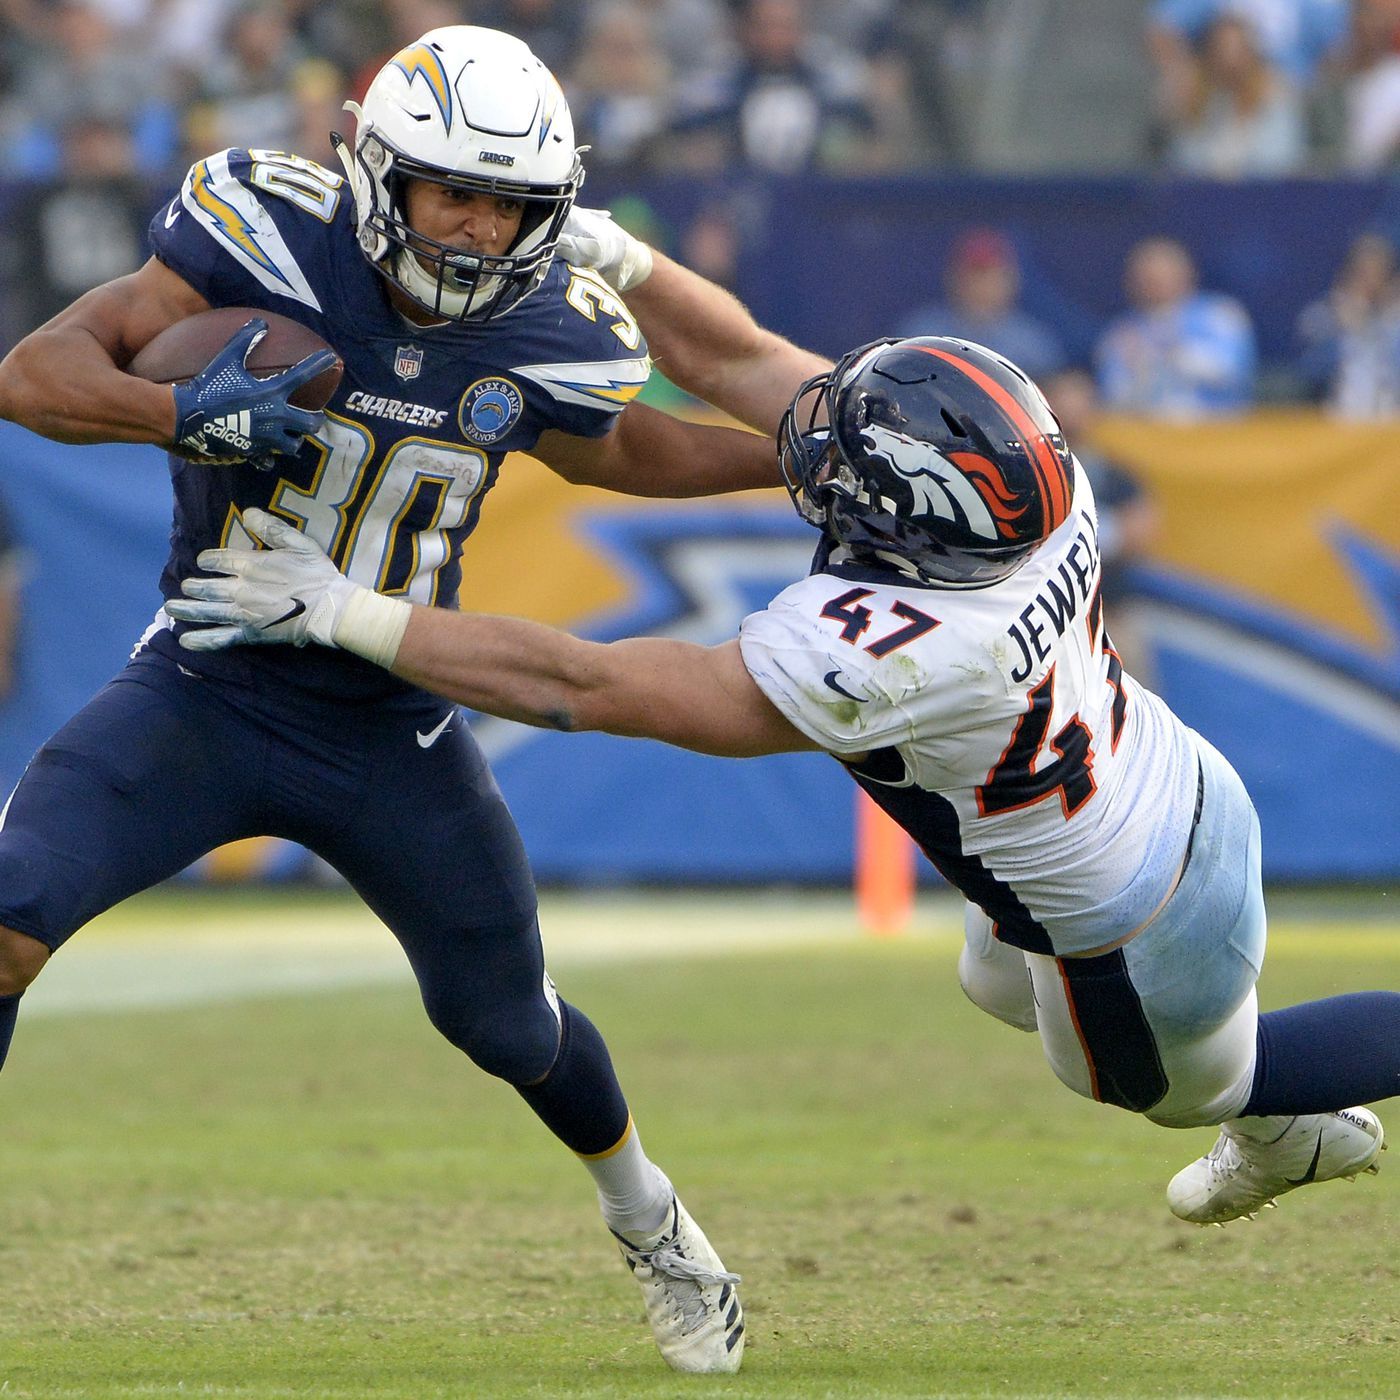 Austin Ekeler is not Melvin Gordon, but you can't dismiss his